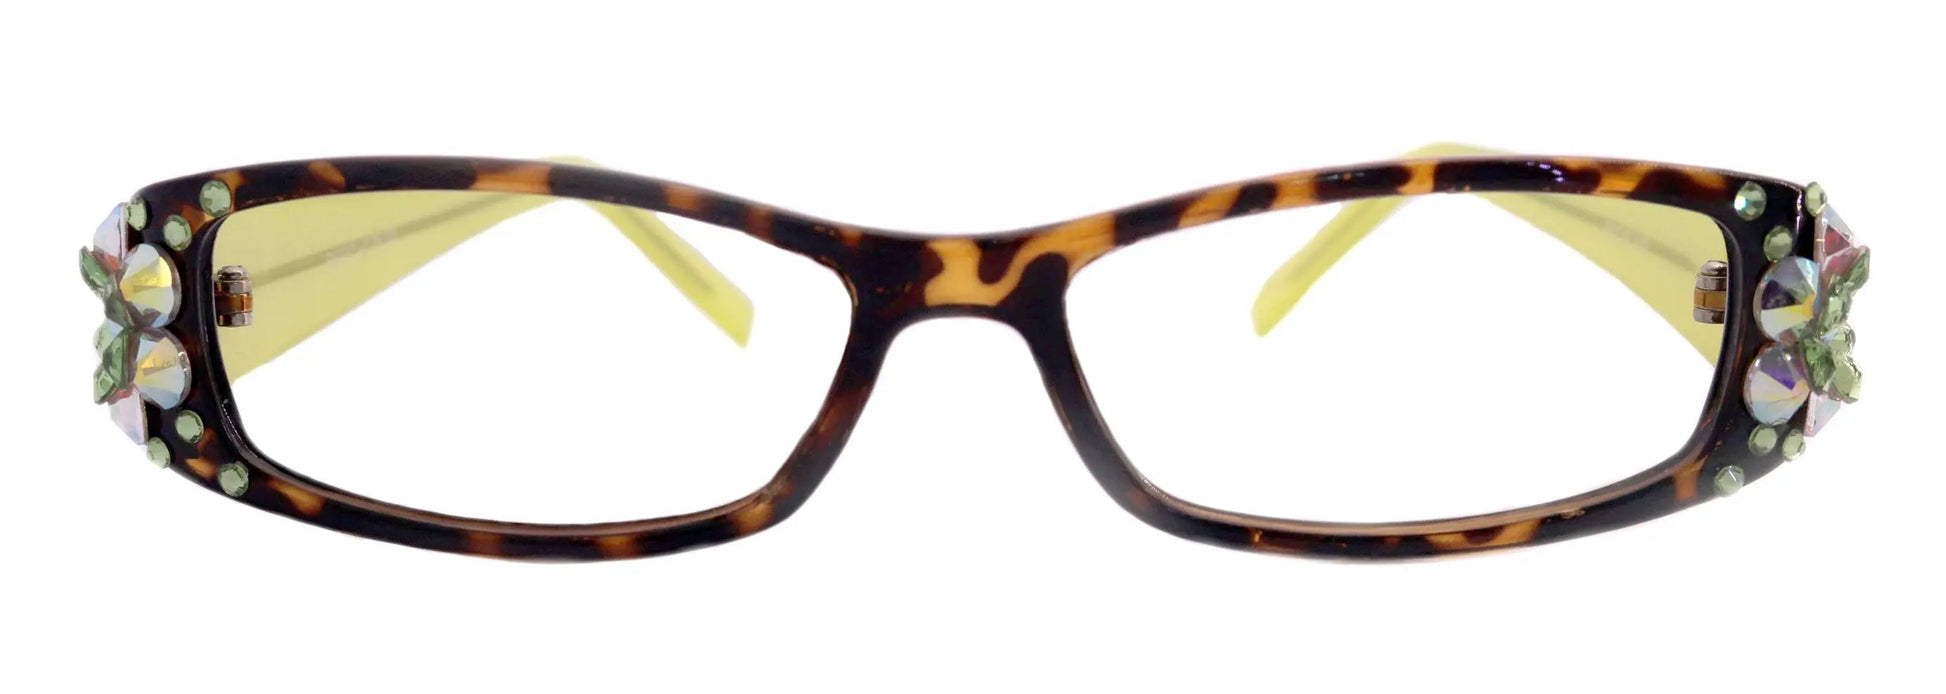 All Favorite, (Bling) Reading Glasses Women Adorned W European Crystals  (Tortoise Brown) Frame +4 +4.5 +5 +6 NY Fifth Avenue.